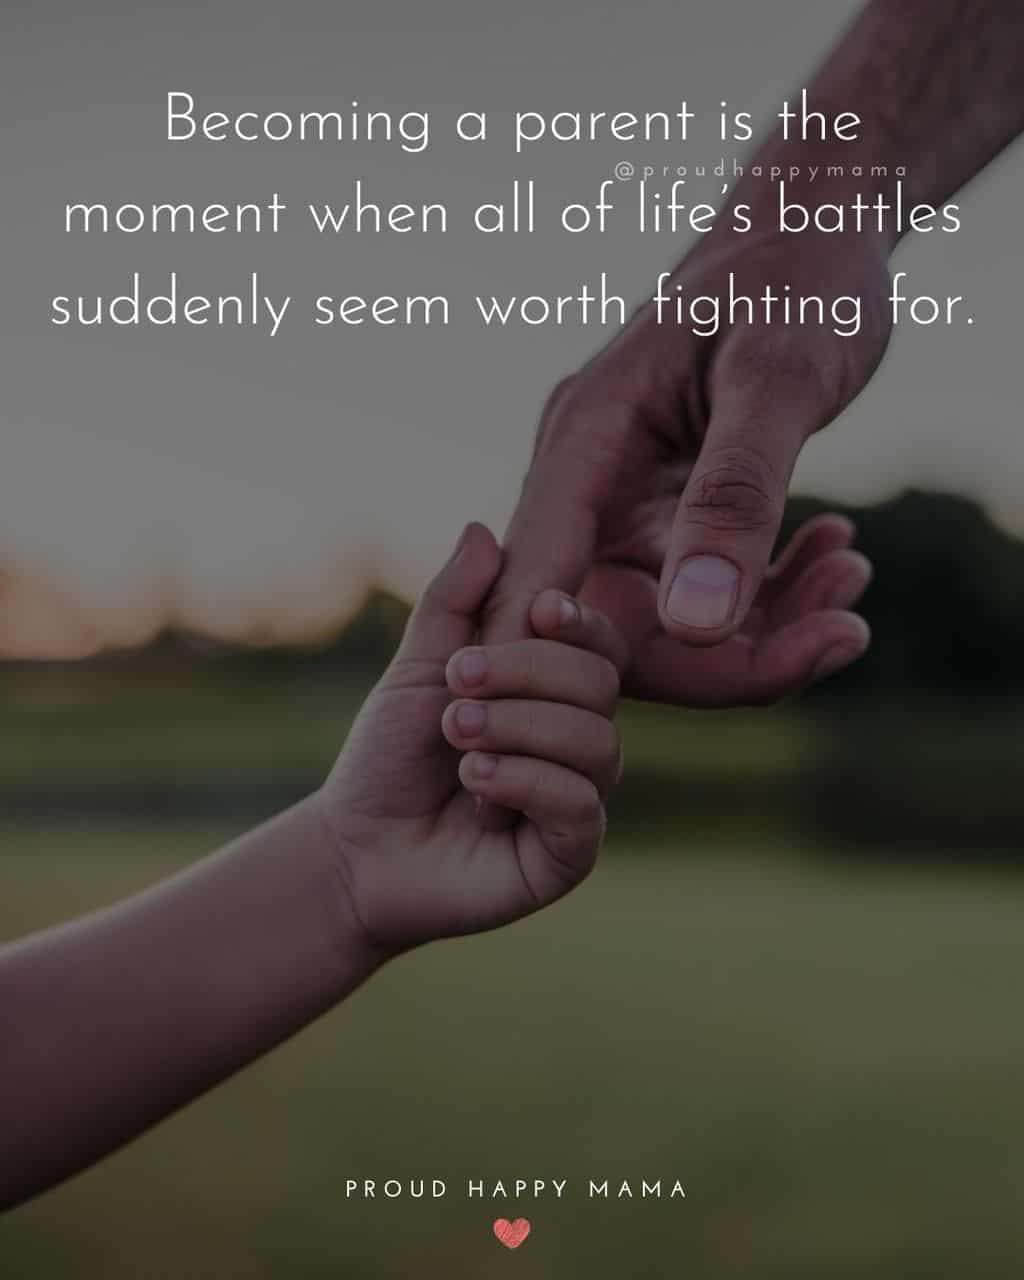 Parenting Quotes - Becoming a parent is the moment when all of life’s battles suddenly seem worth fighting for.’